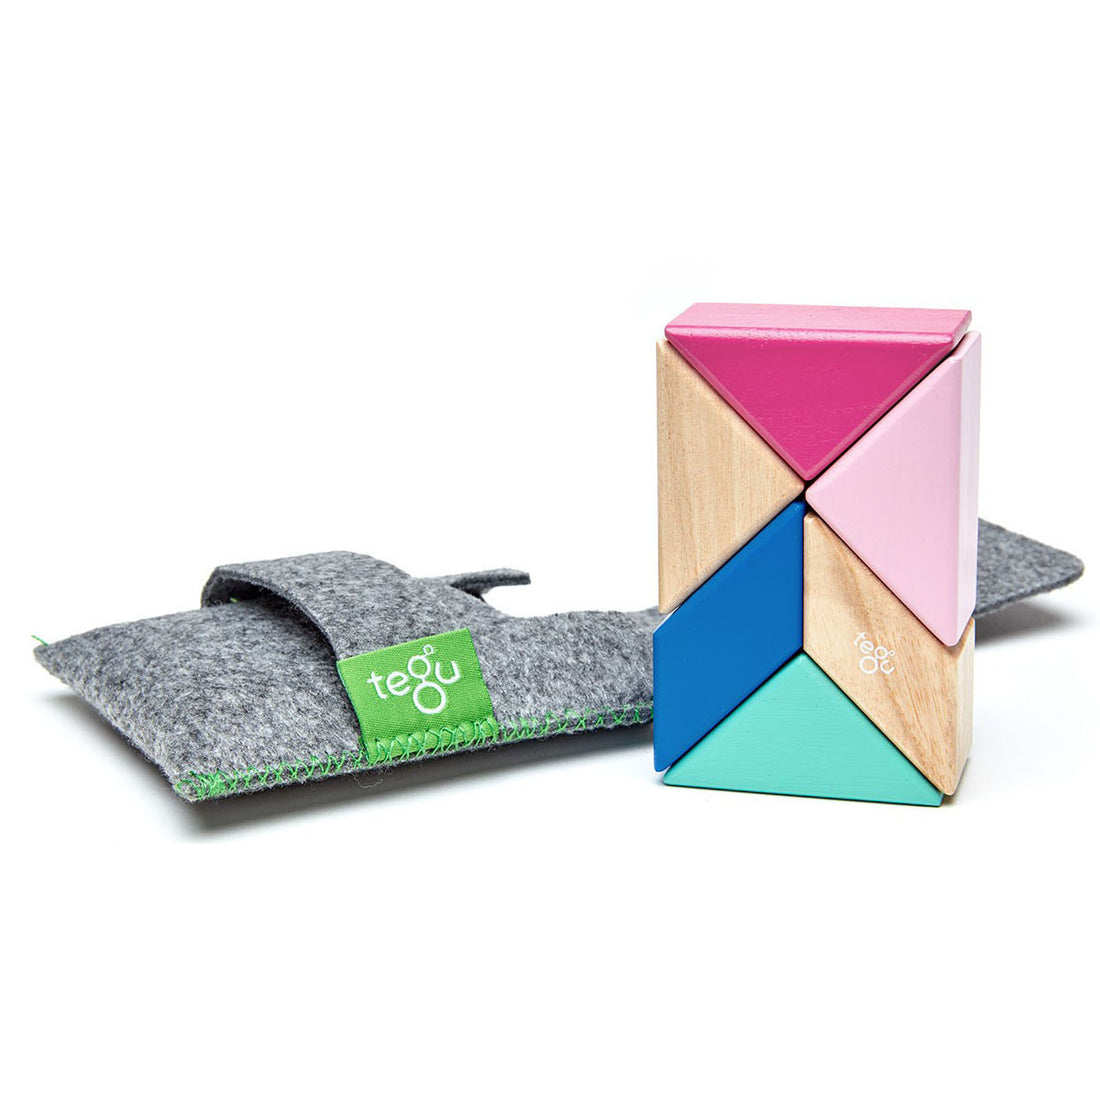 tegu-prism-pocket-pouch-in-blossom- (1)